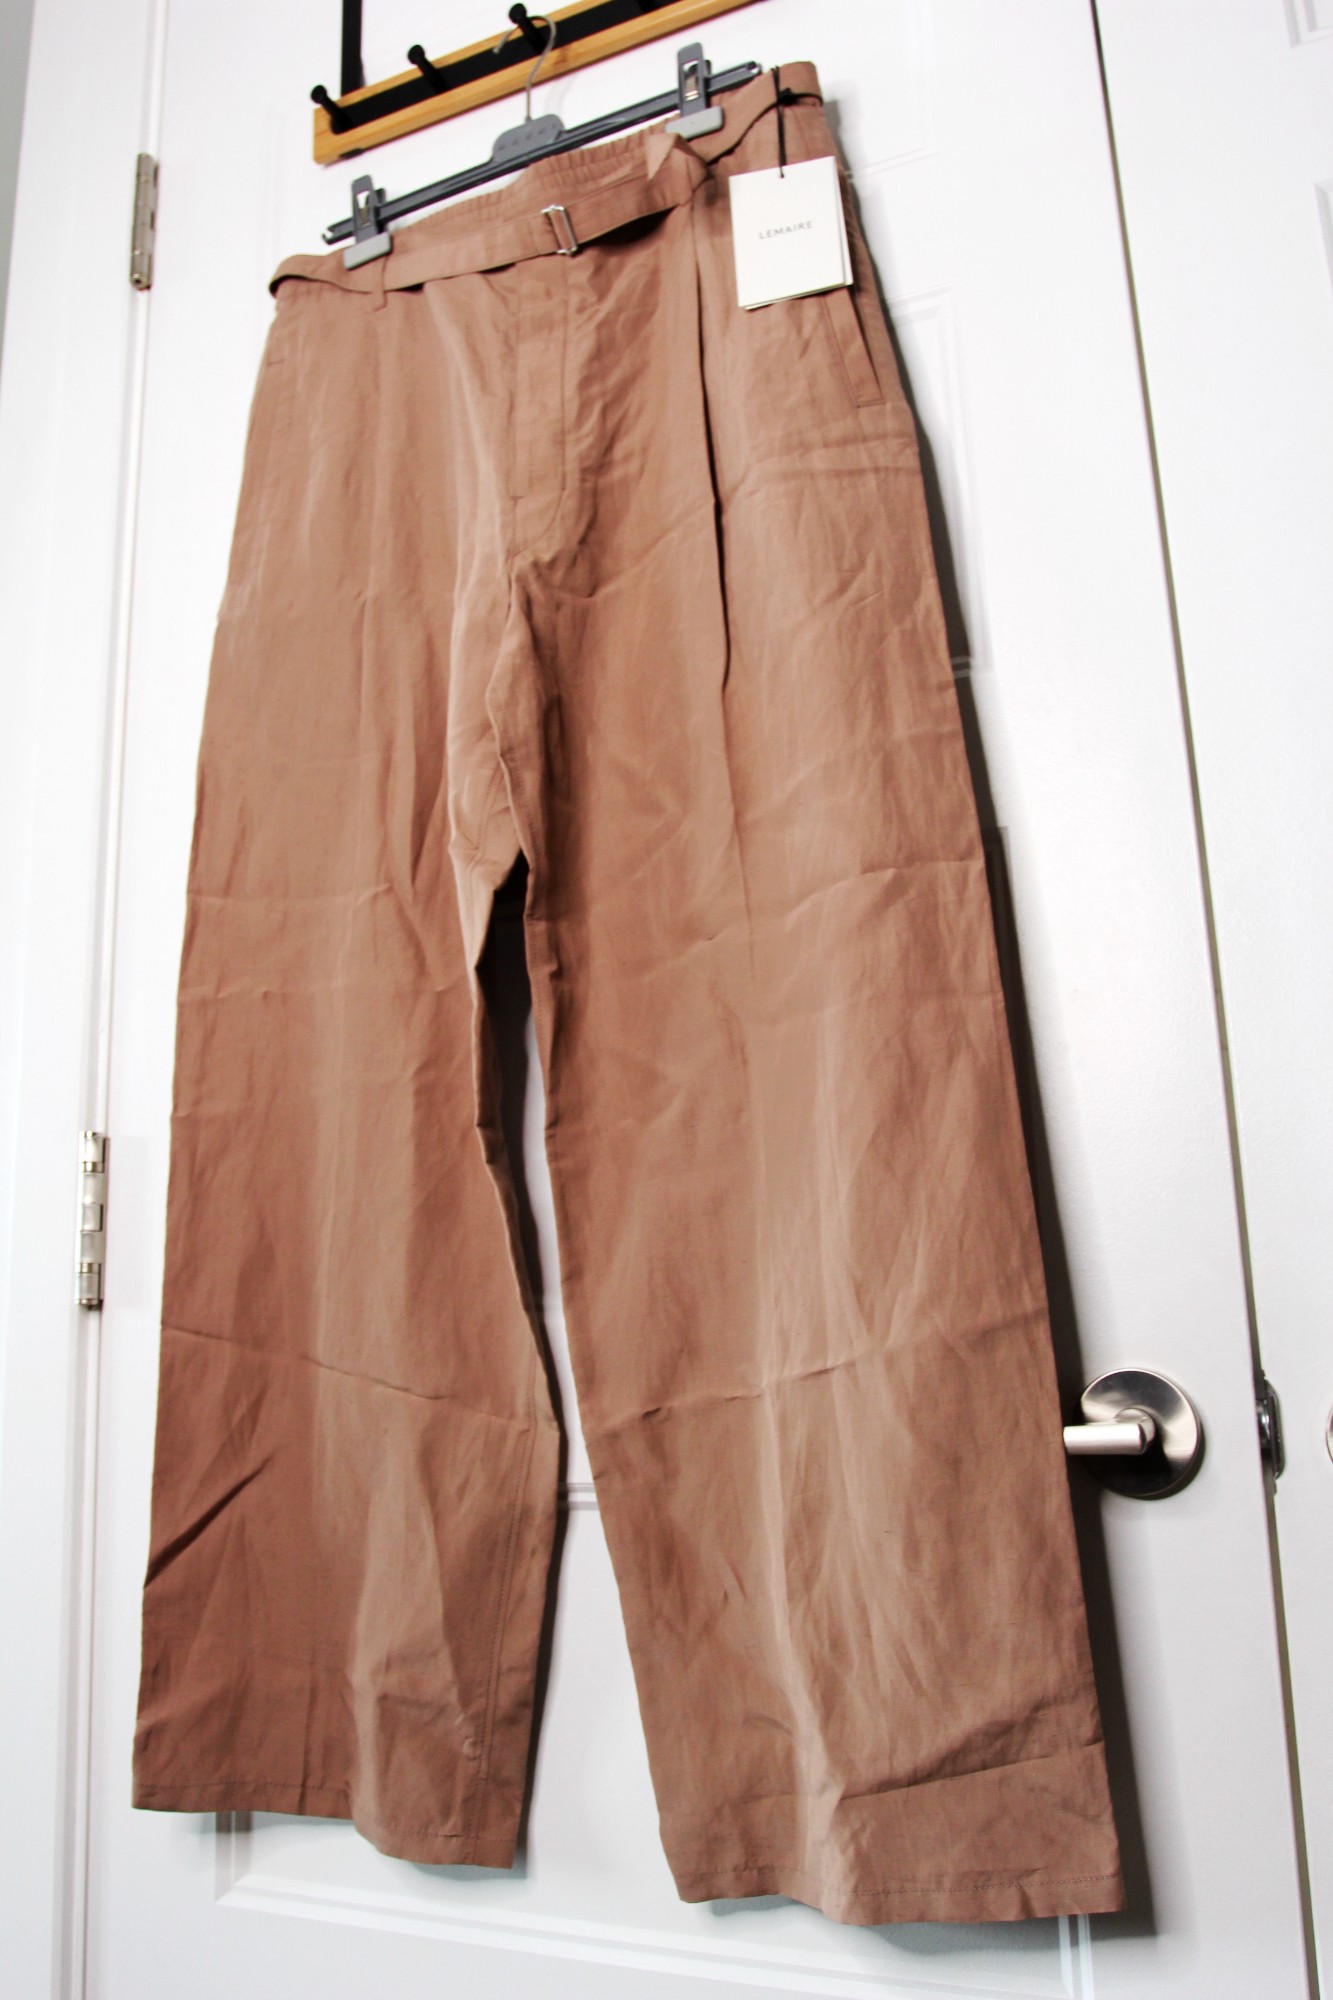 BNWT SS23 LEMAIRE BELTED EASY PANTS 52 - 6